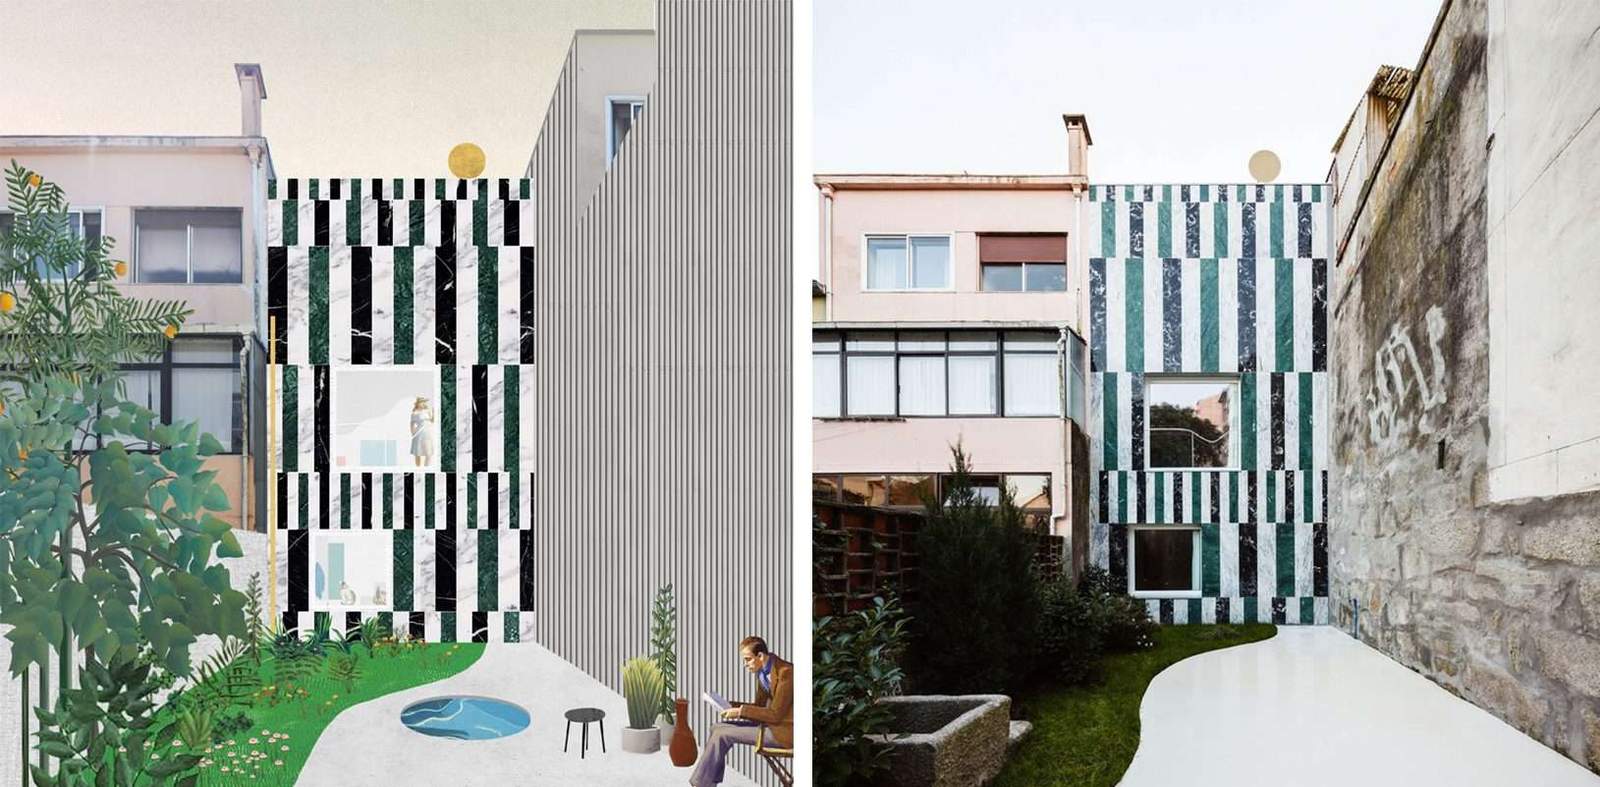 Color, Cartoons, Collage and PoMo: Are Photorealistic Architectural Renderings Going Out of Style?